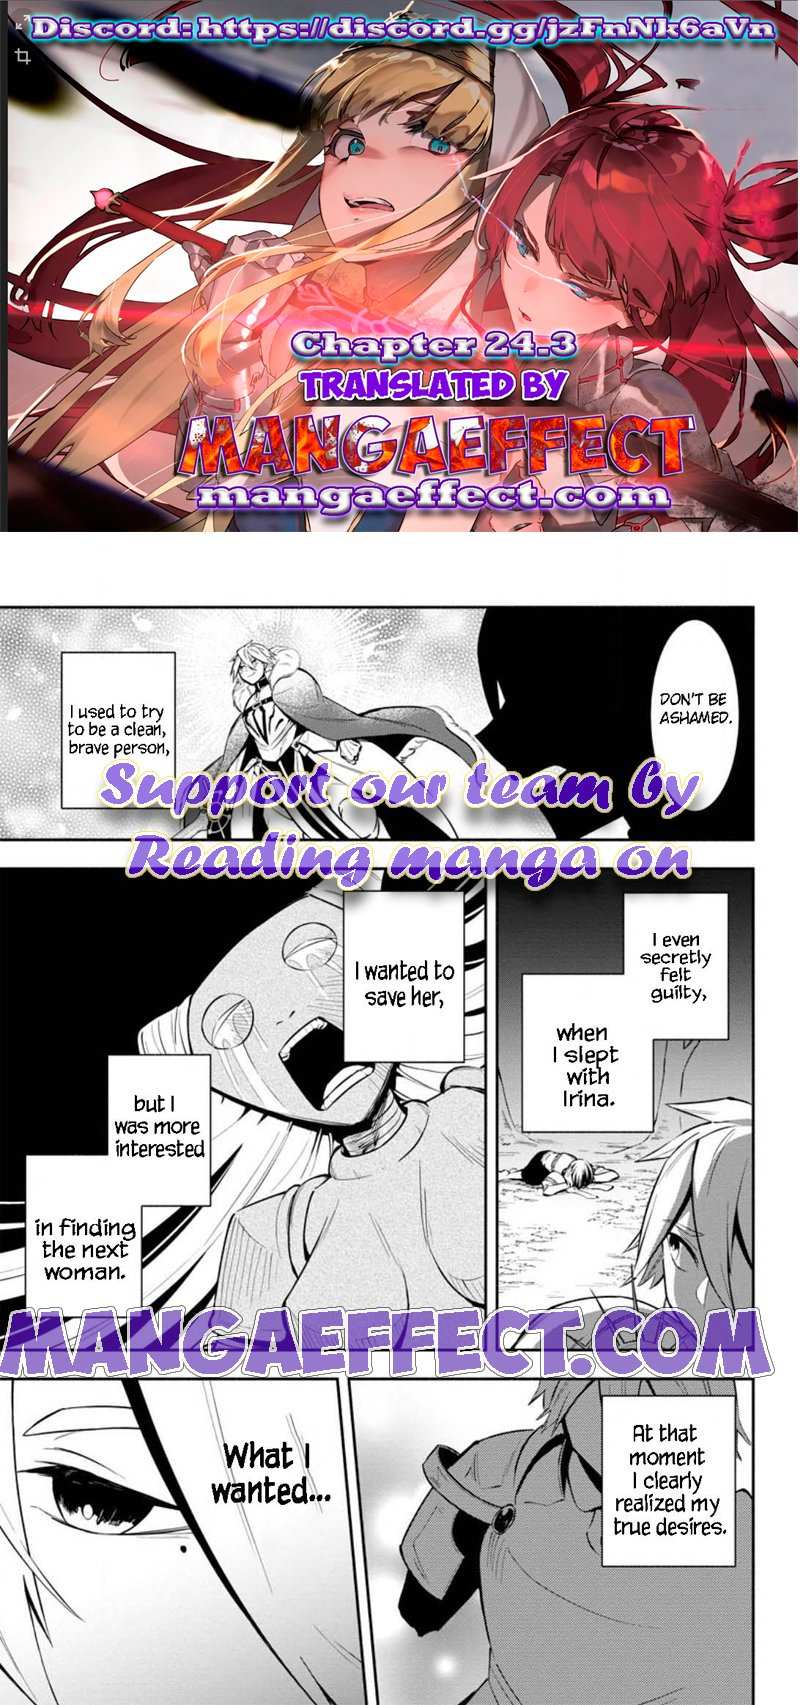 My Lover Was Stolen, And I Was Kicked Out Of The Hero’S Party, But I Awakened To The Ex Skill “Fixed Damage” And Became Invincible. Now, Let’S Begin Some Revenge - Page 2